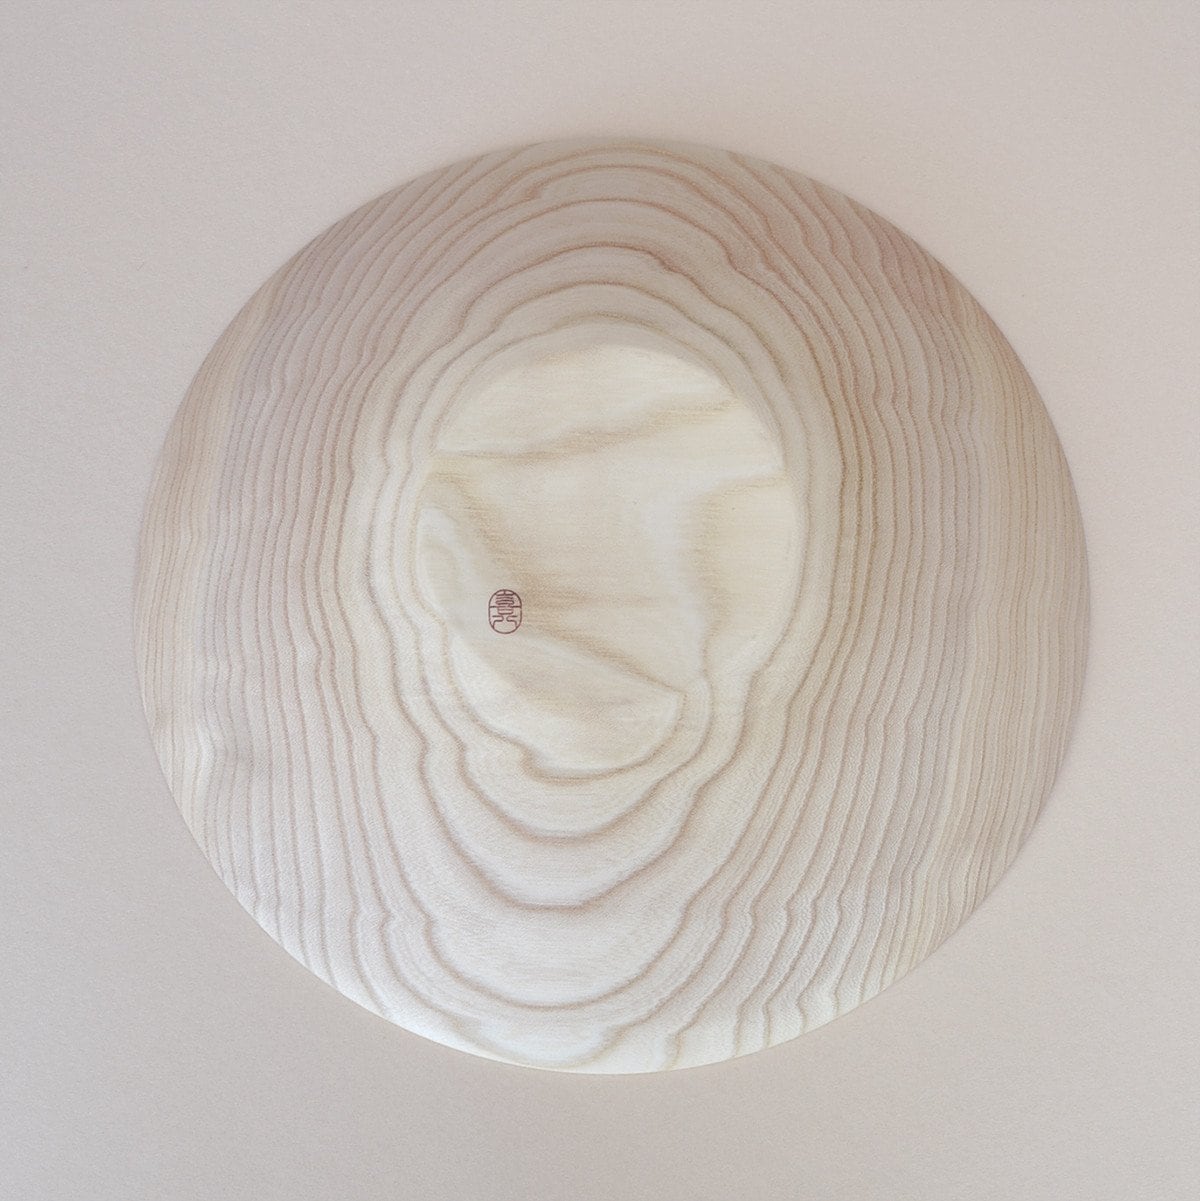 A Kihachi Wooden Plate - Small on a white surface.